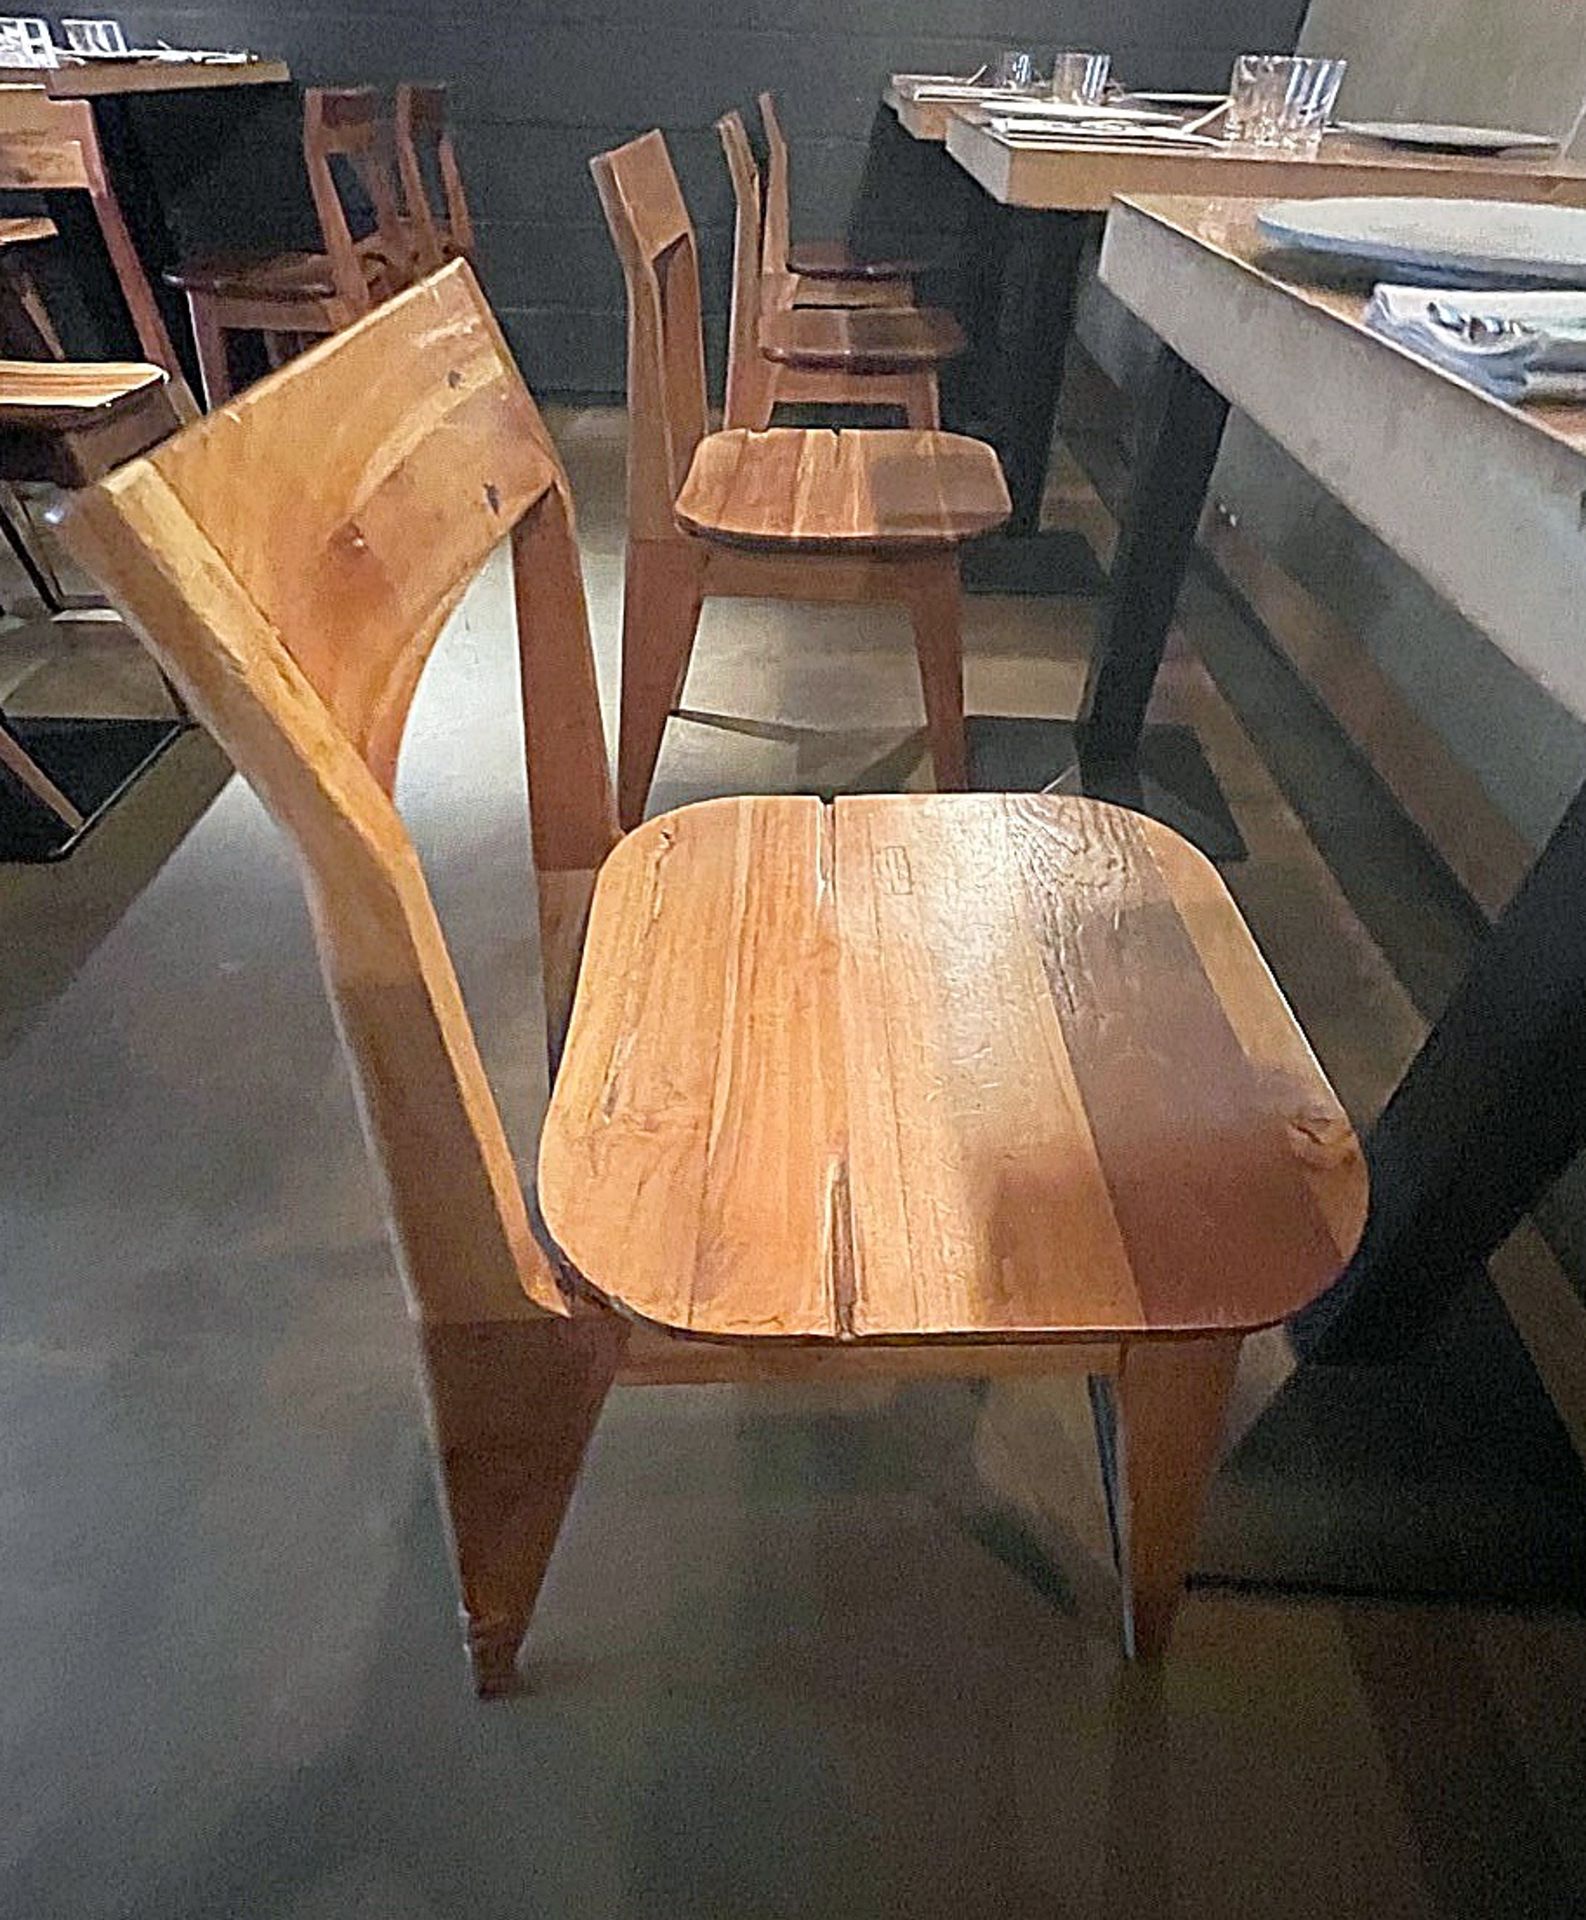 12 x Solid Wood Bistro Dining Chairs - Ref: MAN141 - CL677 - Location: London W1FThis item is to